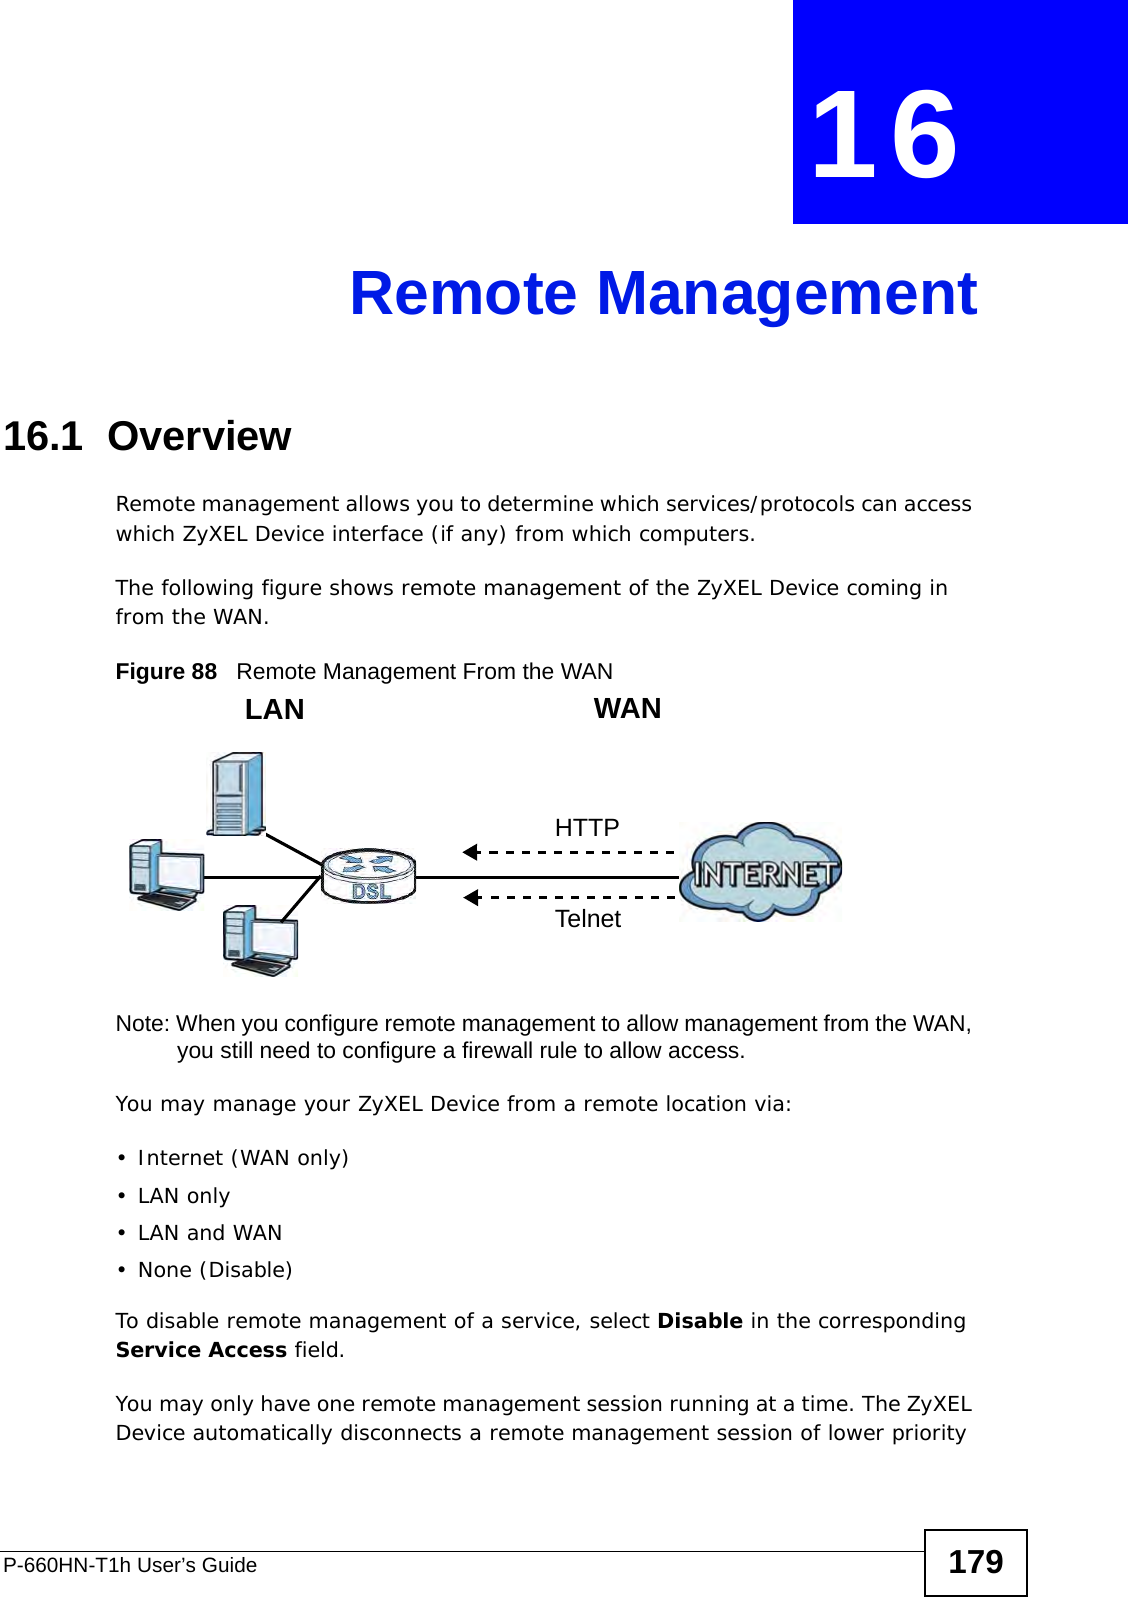 P-660HN-T1h User’s Guide 179CHAPTER  16 Remote Management16.1  OverviewRemote management allows you to determine which services/protocols can access which ZyXEL Device interface (if any) from which computers.The following figure shows remote management of the ZyXEL Device coming in from the WAN.Figure 88   Remote Management From the WANNote: When you configure remote management to allow management from the WAN, you still need to configure a firewall rule to allow access.You may manage your ZyXEL Device from a remote location via:•Internet (WAN only)•LAN only•LAN and WAN• None (Disable)To disable remote management of a service, select Disable in the corresponding Service Access field.You may only have one remote management session running at a time. The ZyXEL Device automatically disconnects a remote management session of lower priority LAN WANHTTPTelnet